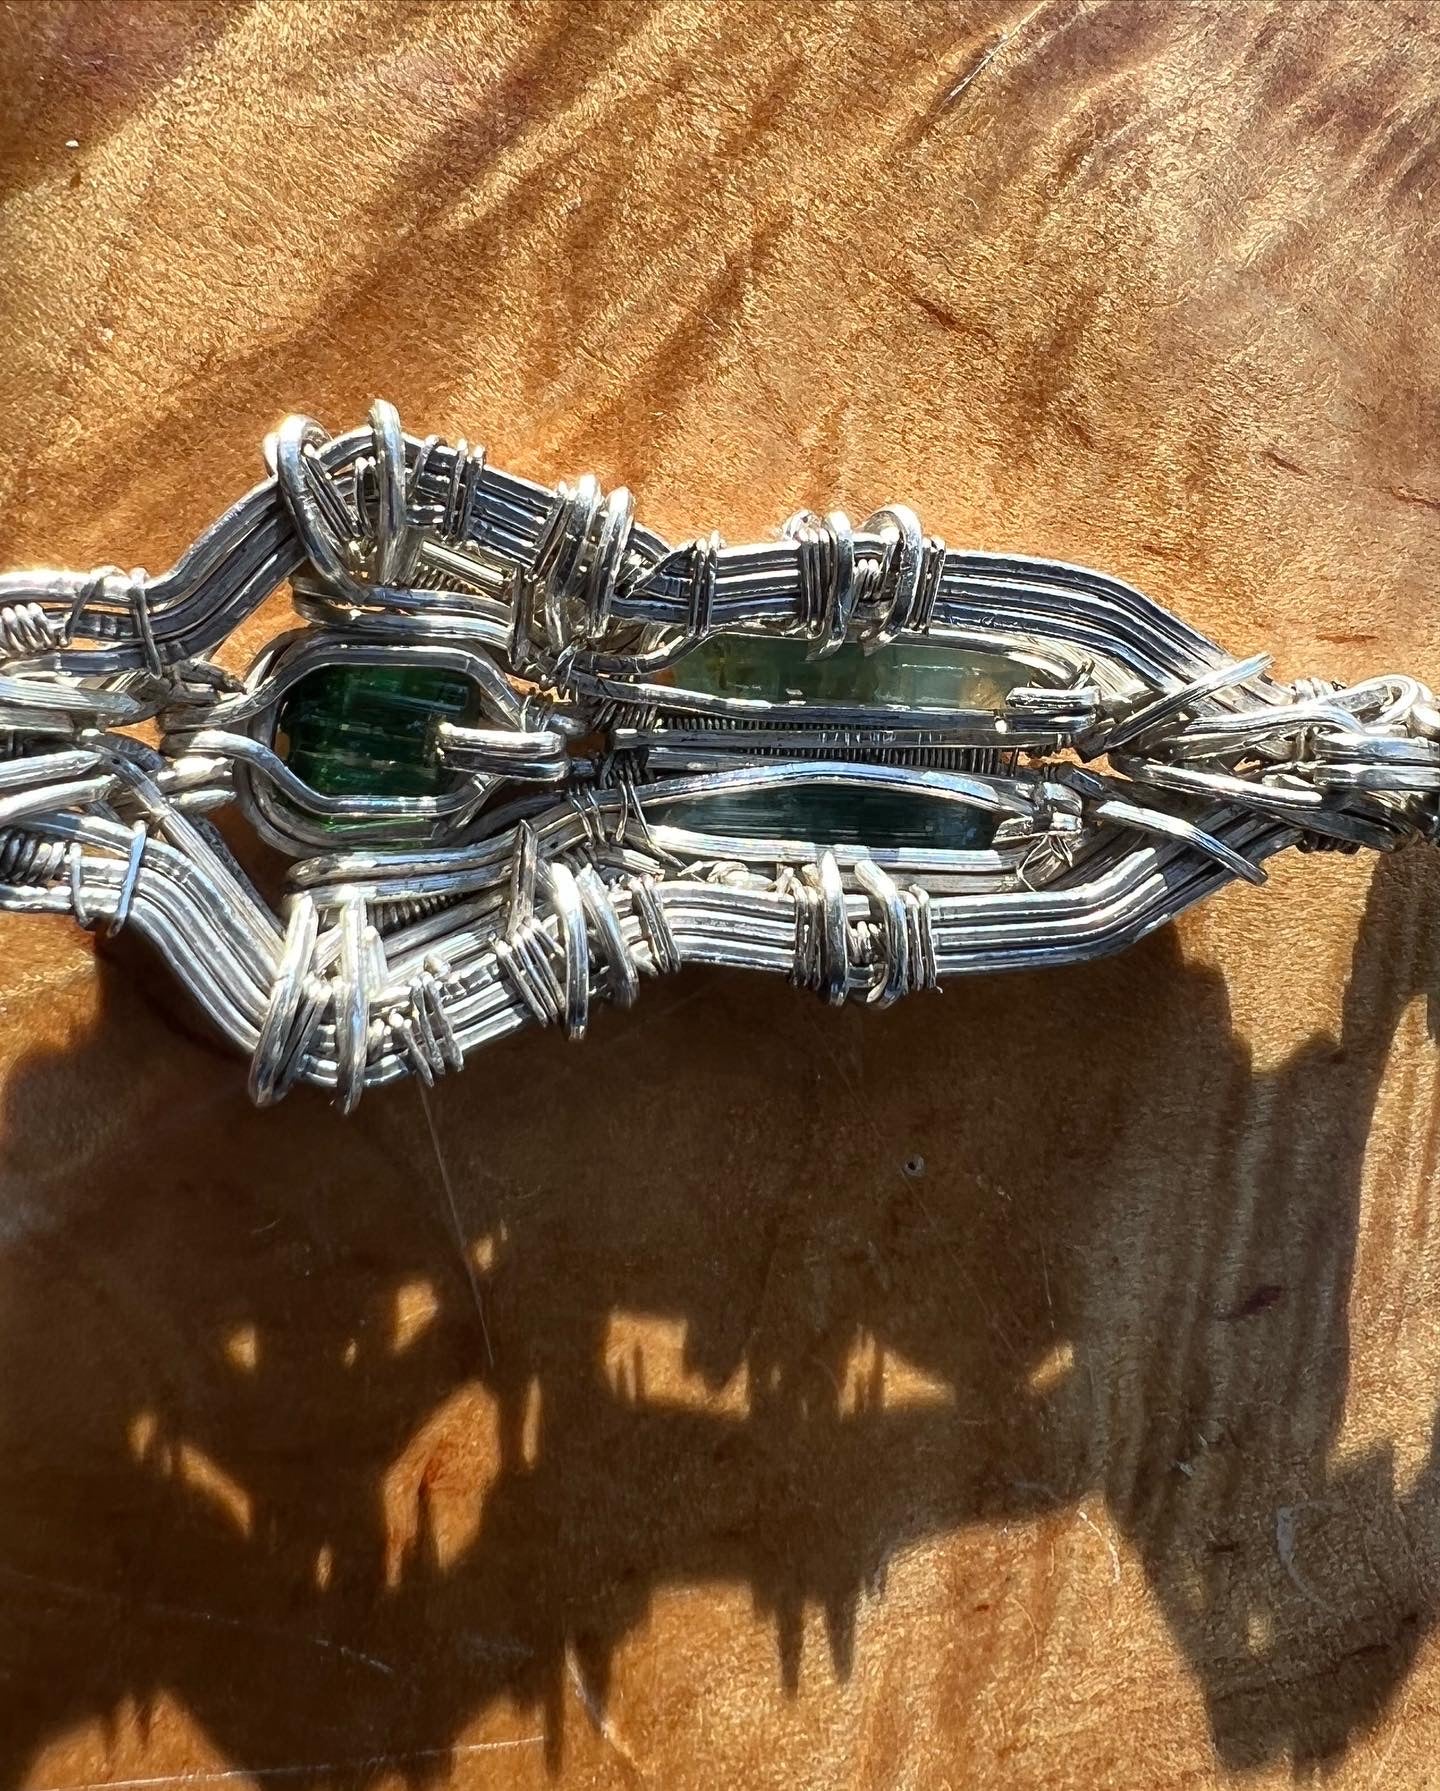 Green Tourmaline Hand-Wrapped Silver Pendant